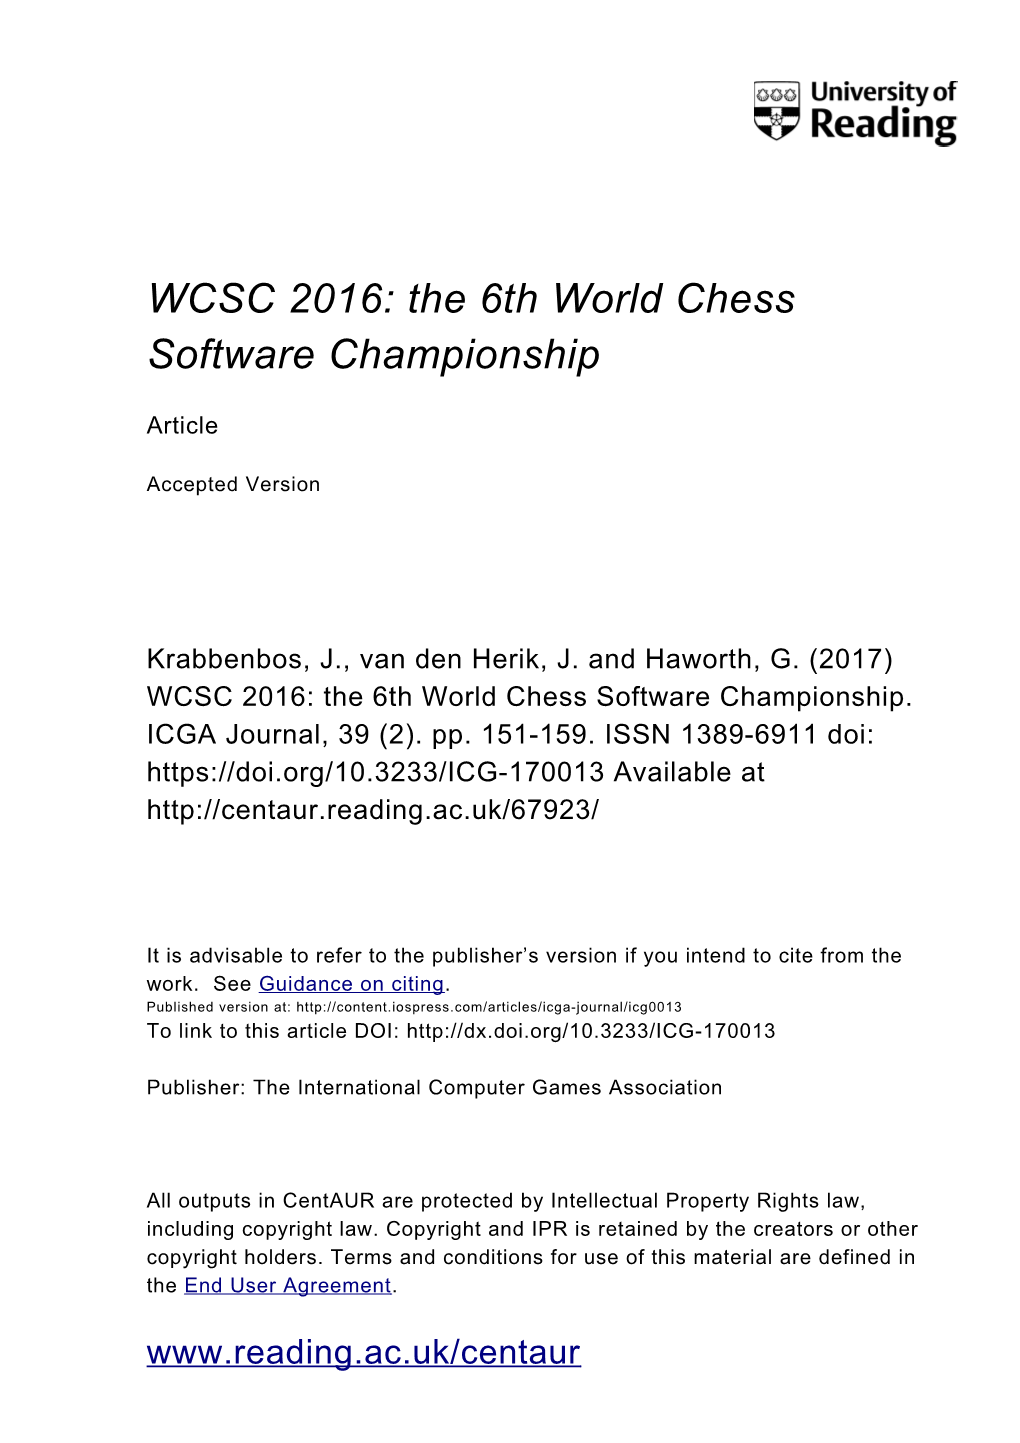 WCSC 2016: the 6Th World Chess Software Championship